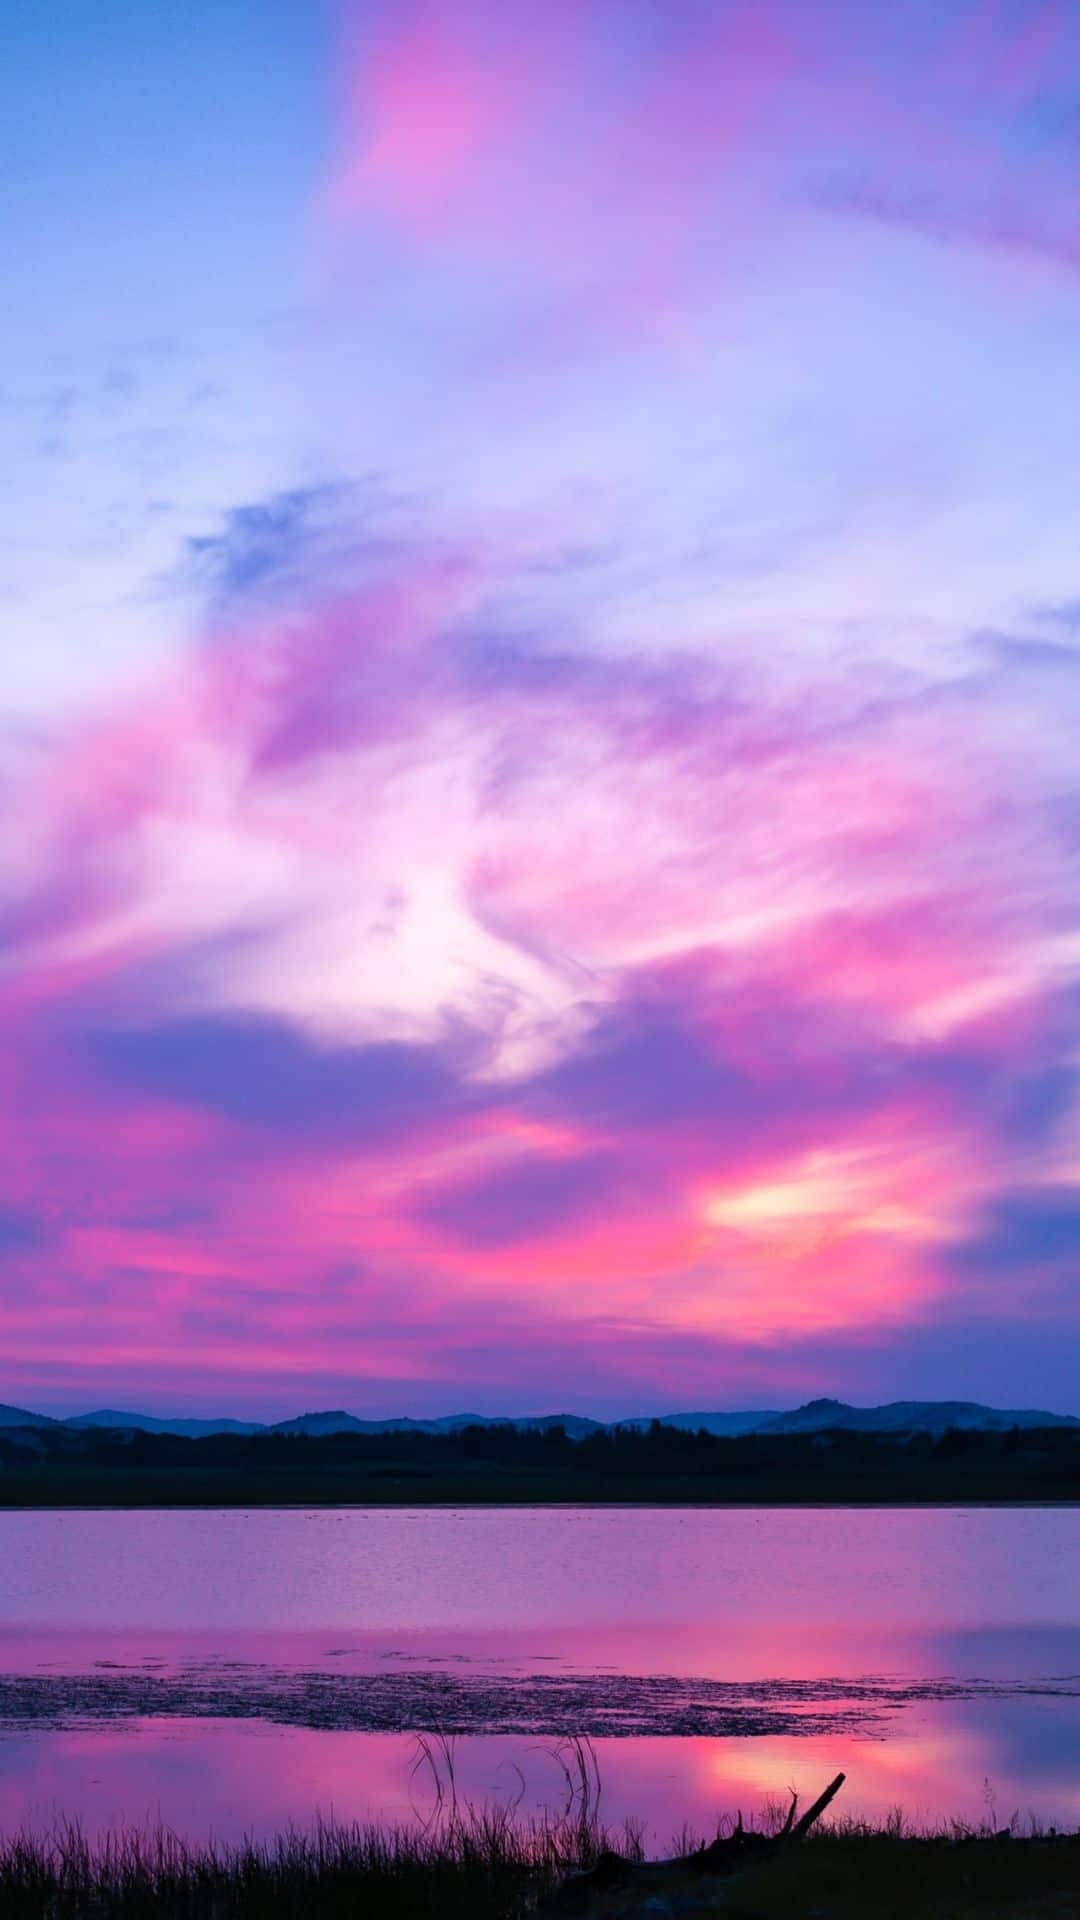 "Take in the Beauty of a Pink Sunset through Your Iphone" Wallpaper